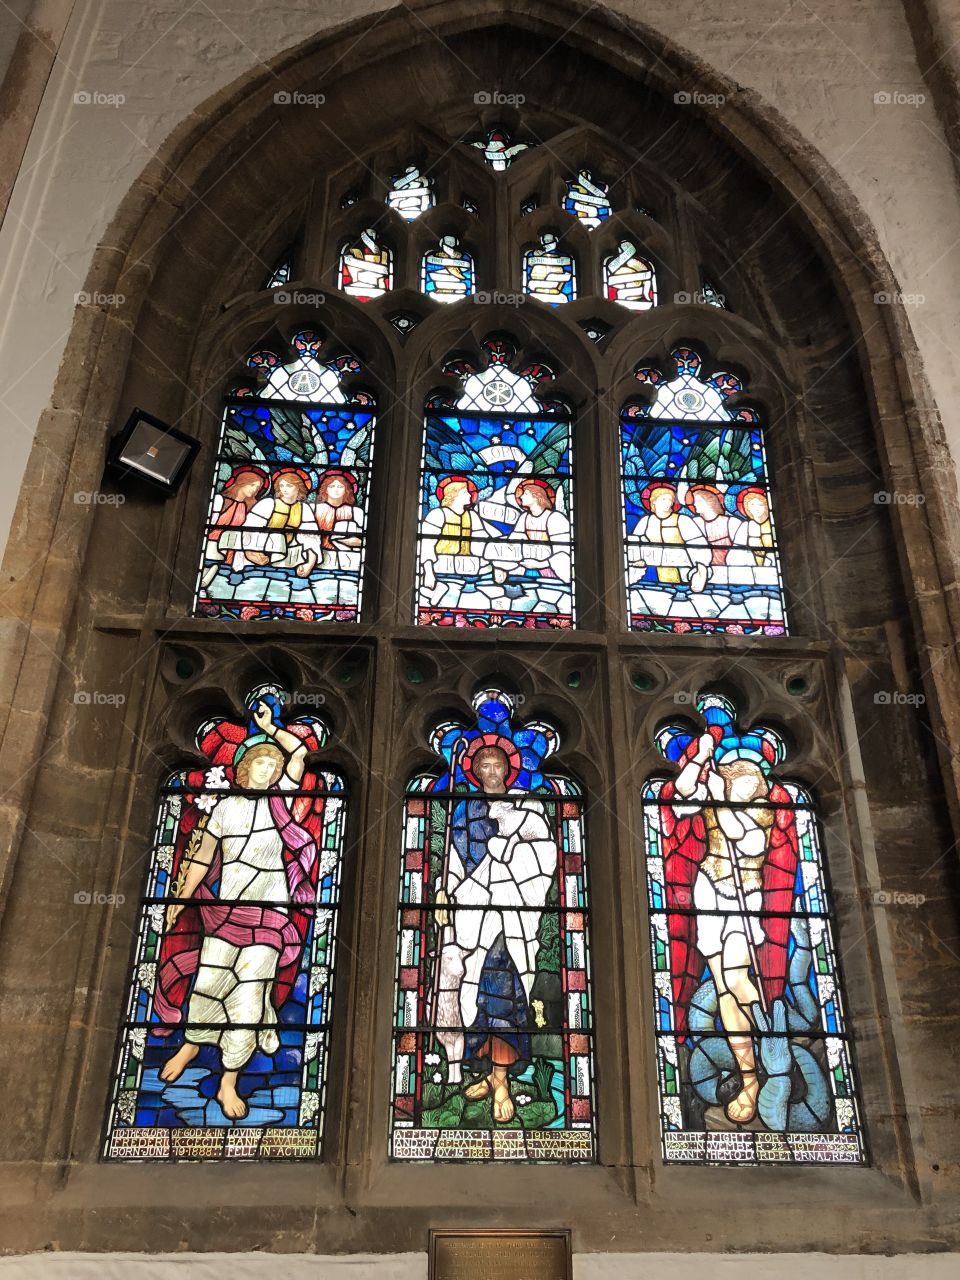 An impressive stained glass window attached to St Mary’s North Petherton.